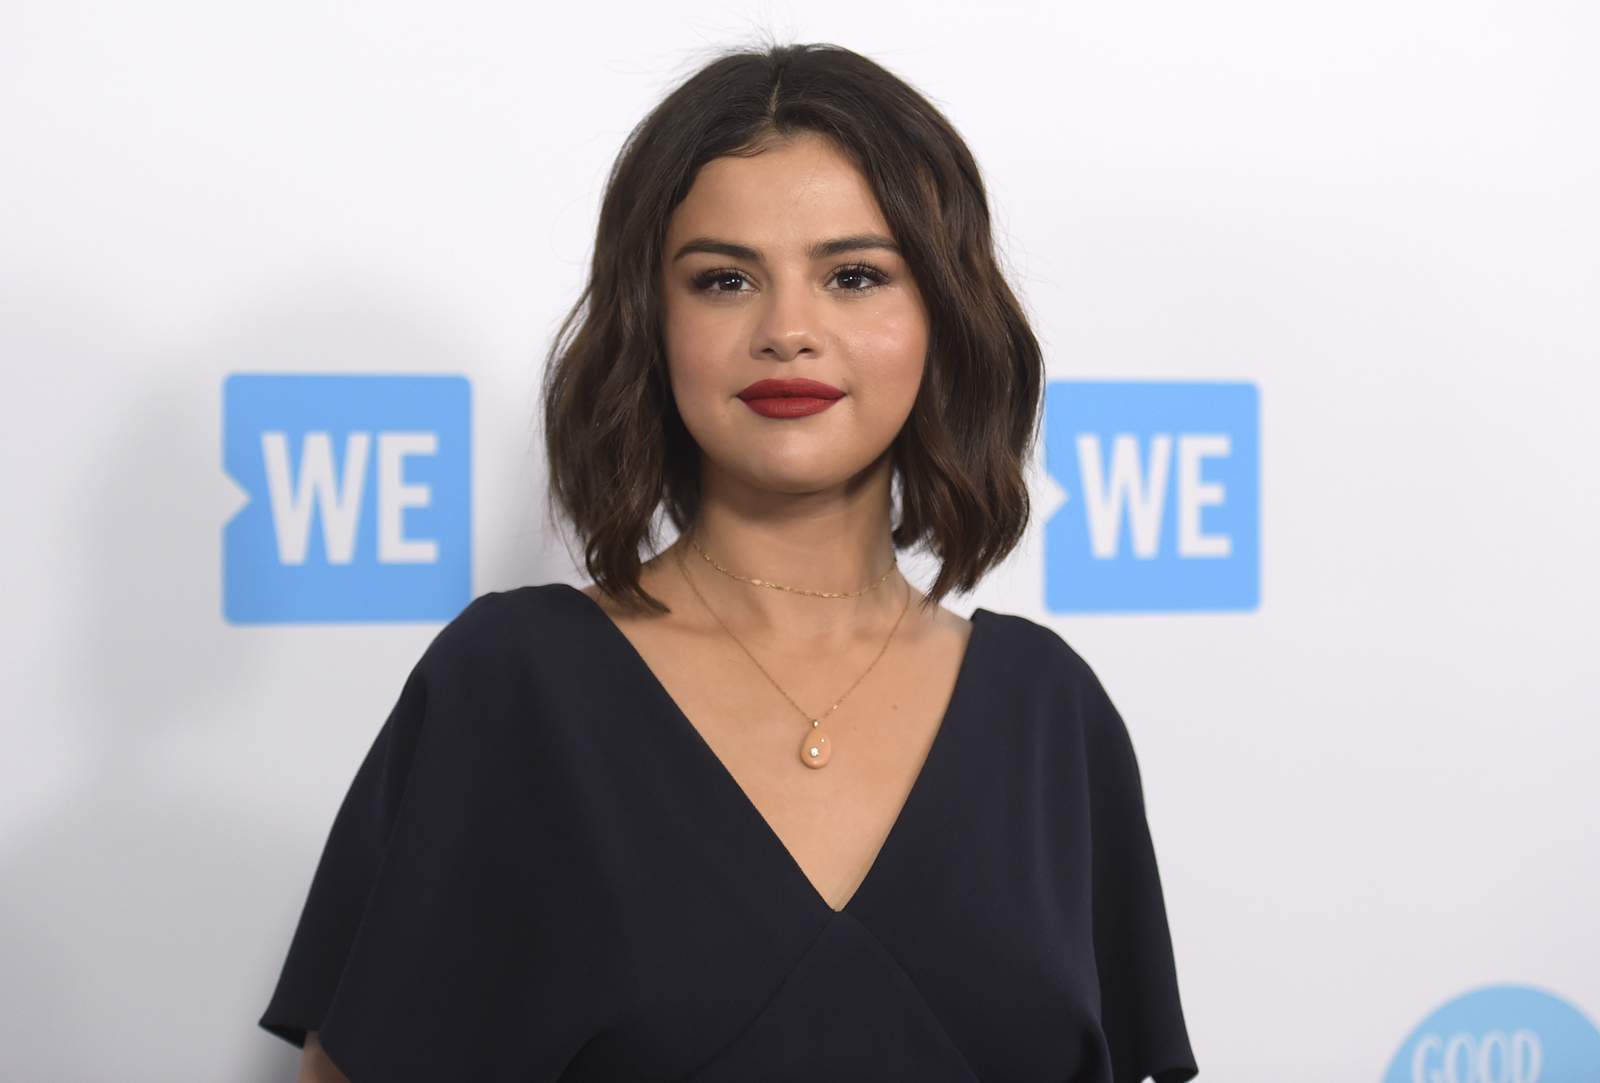 Selena Gomez takes the heat in new cooking show